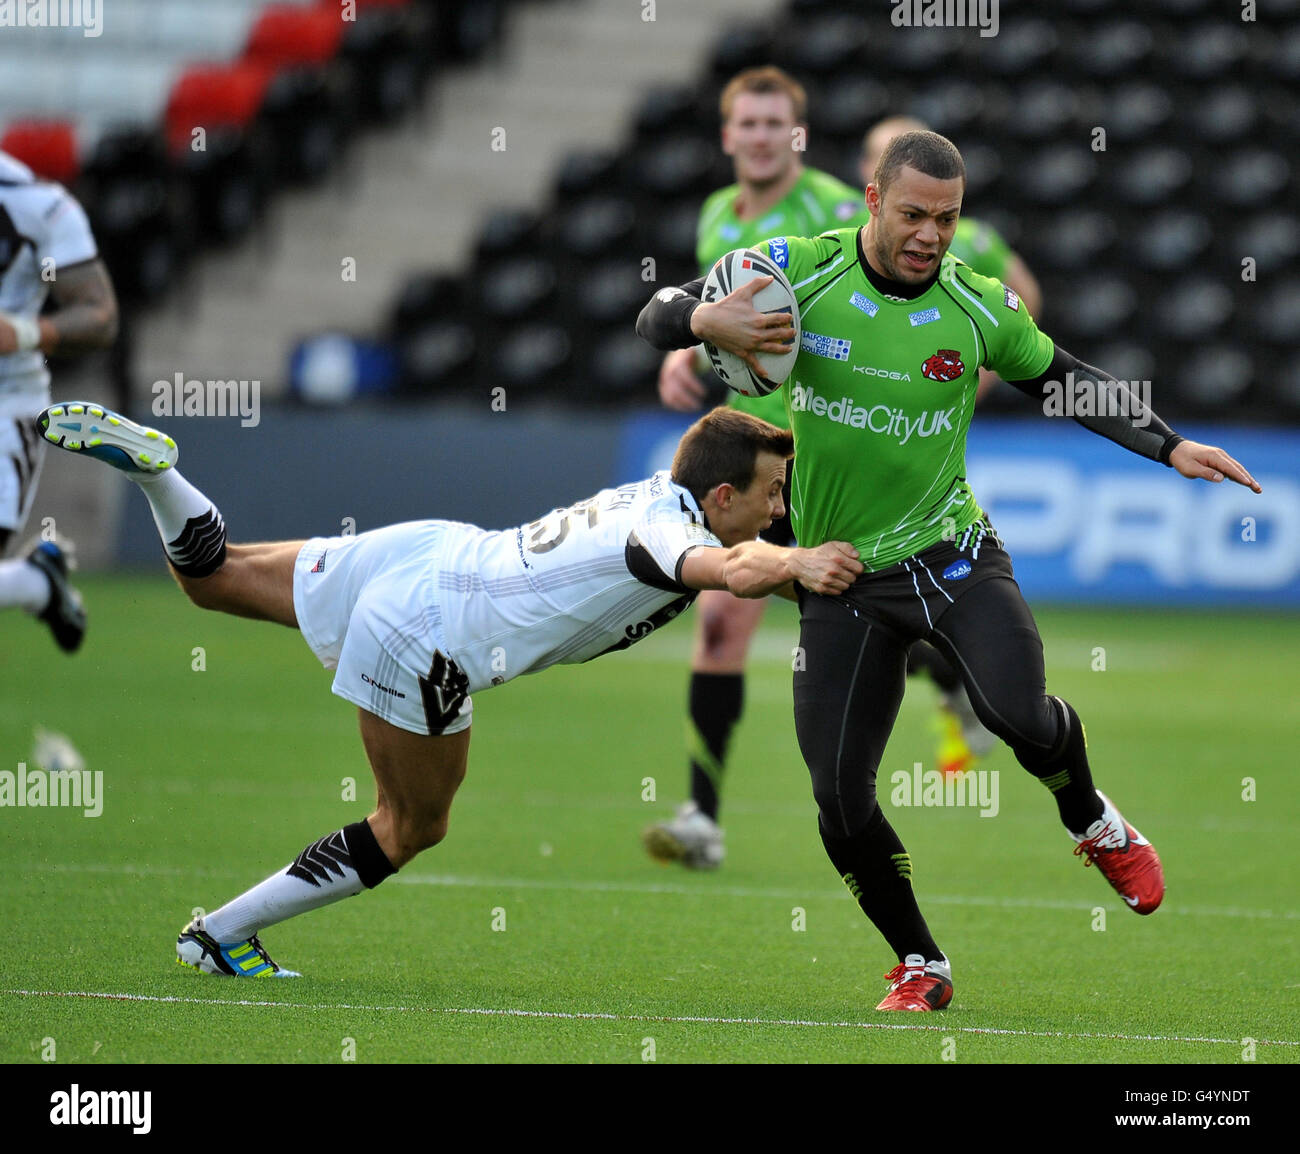 Widnes Vikings' Danny Craven holds on to Salford City Reds' Danny Williams who is dressed to avoid possible burns on the Widness pitch Stock Photo